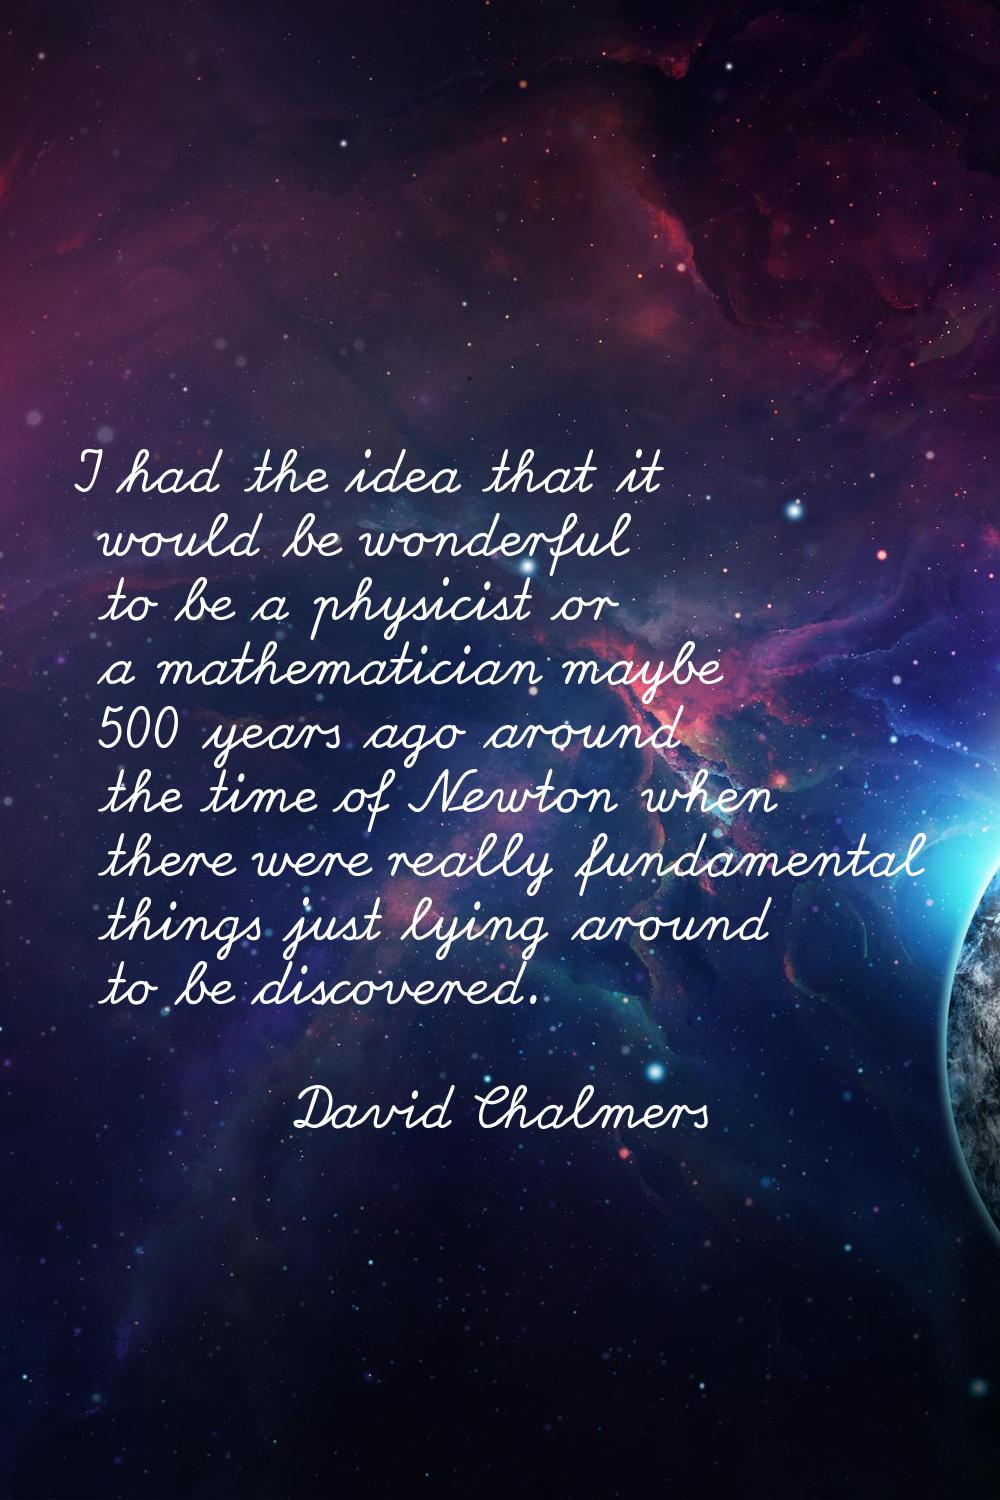 I had the idea that it would be wonderful to be a physicist or a mathematician maybe 500 years ago 